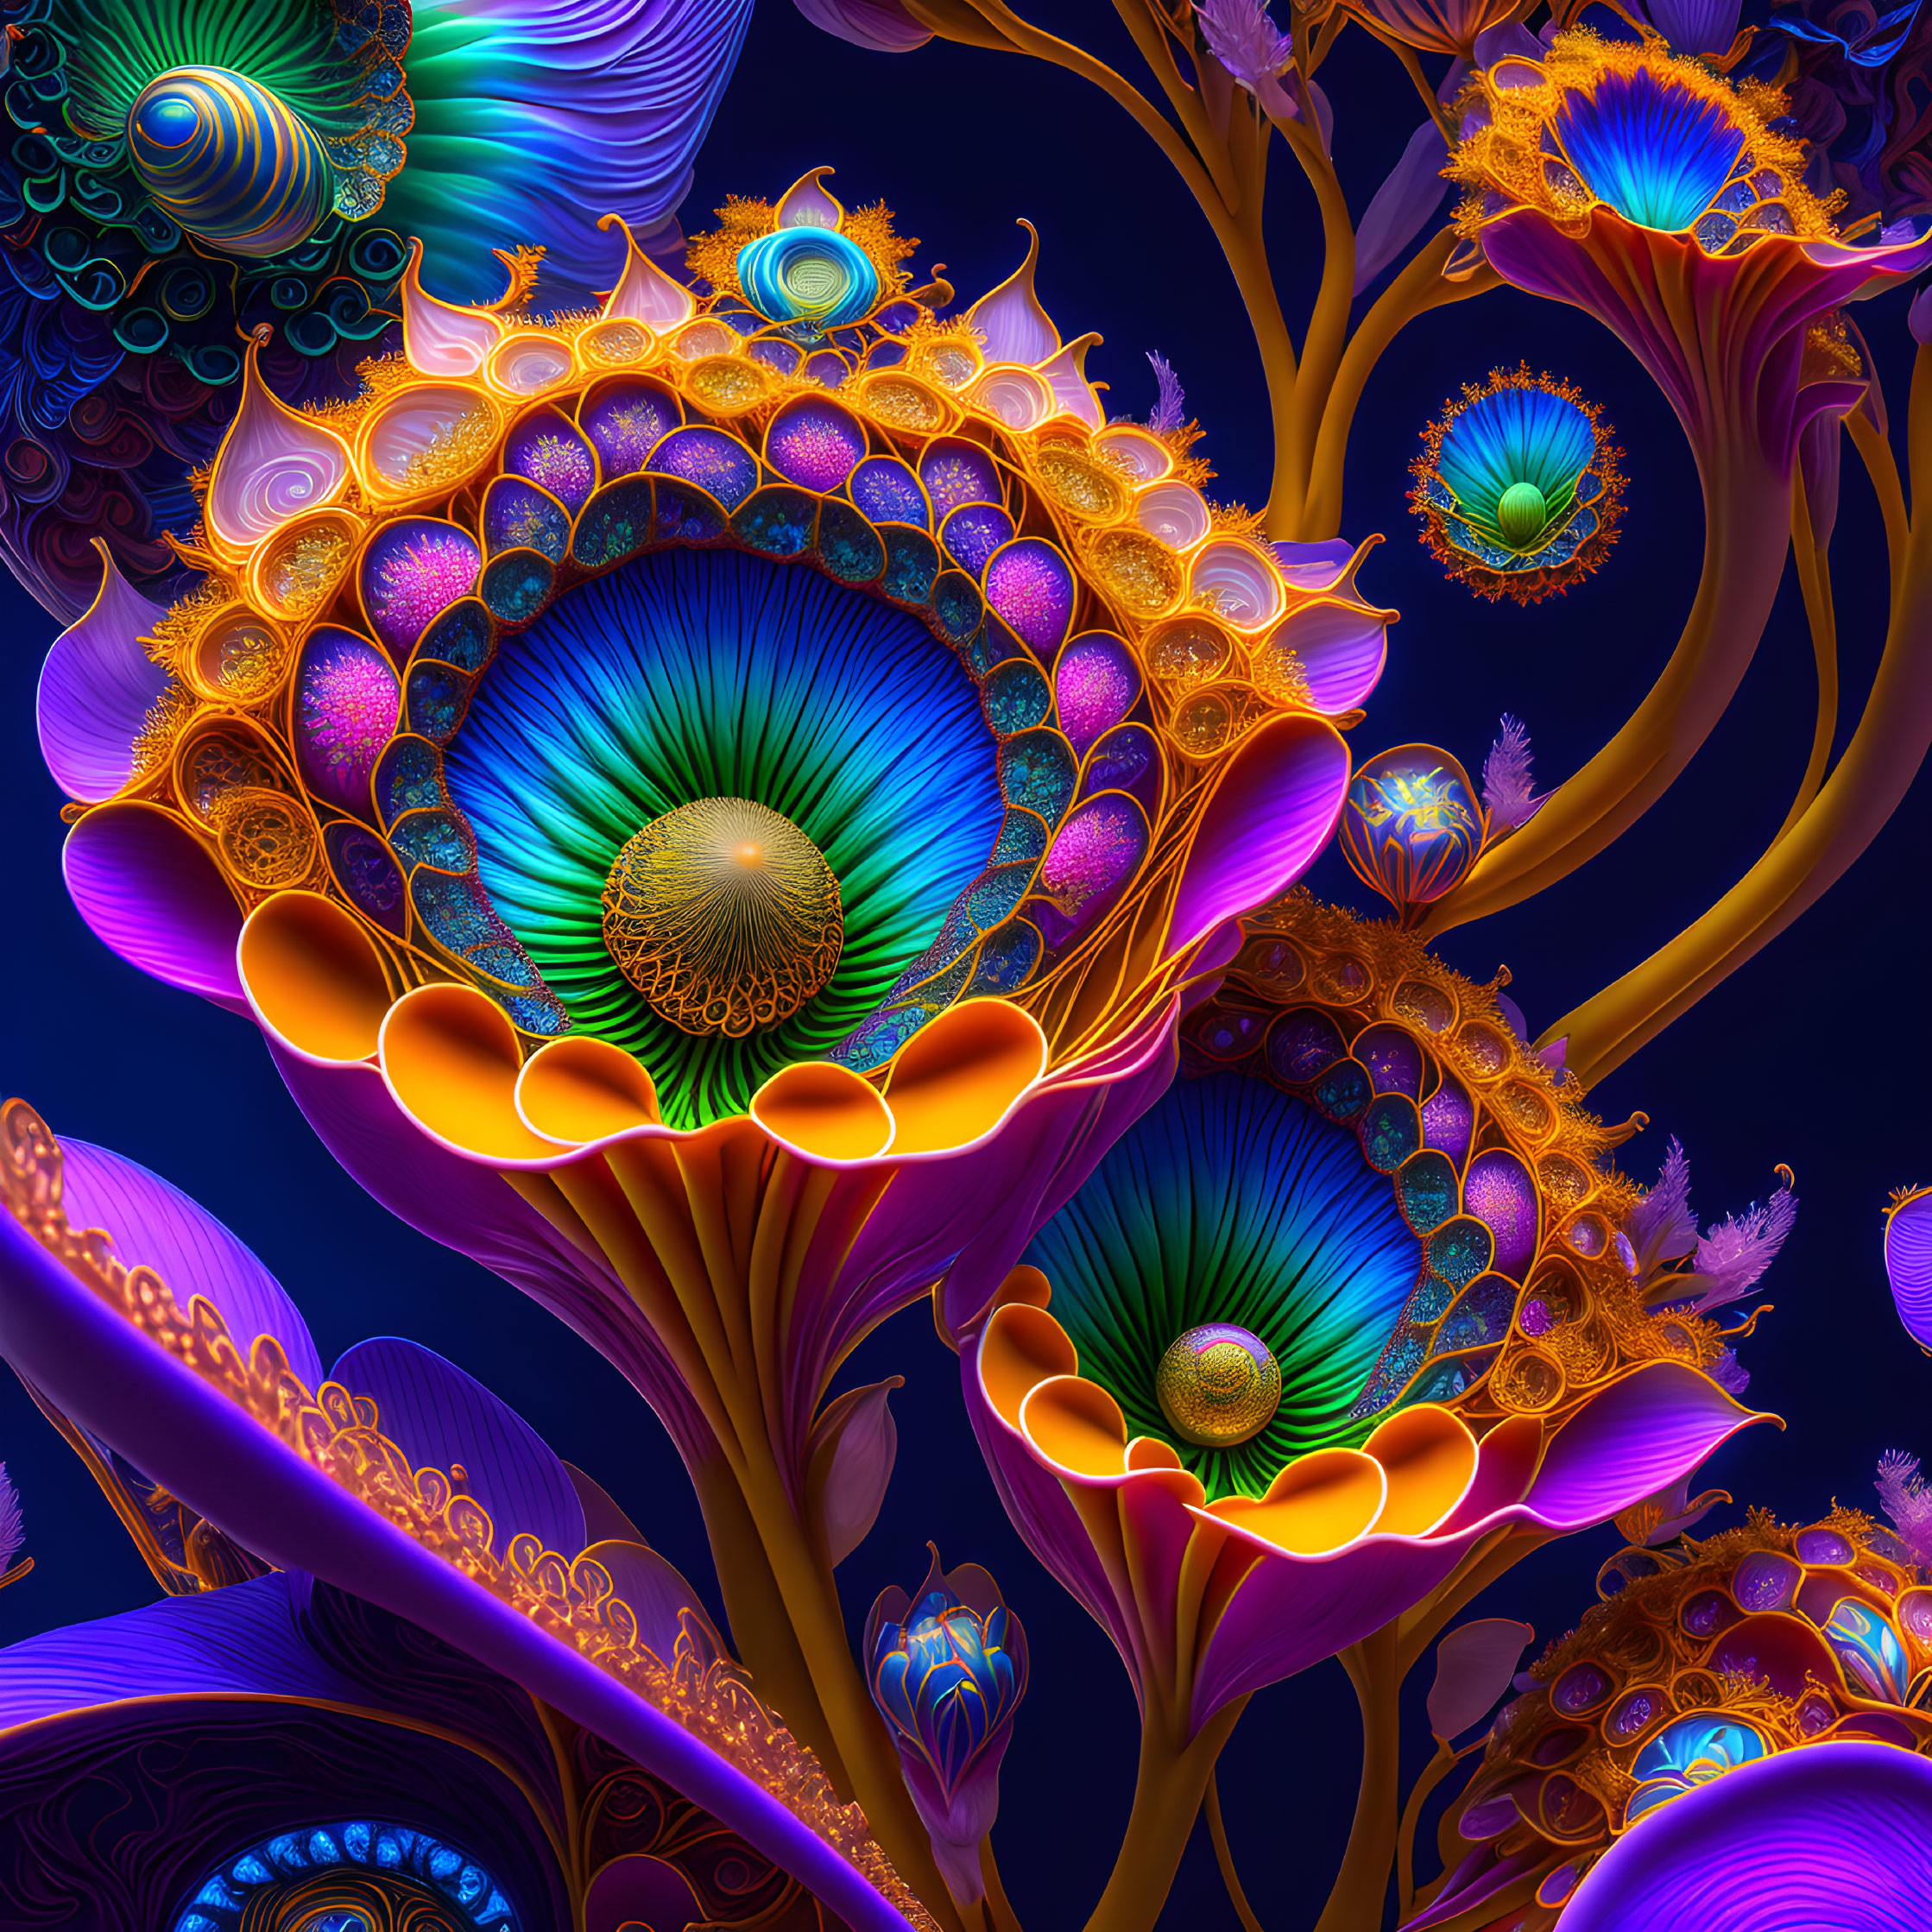 Colorful Abstract Floral Fractal Art on Dark Background